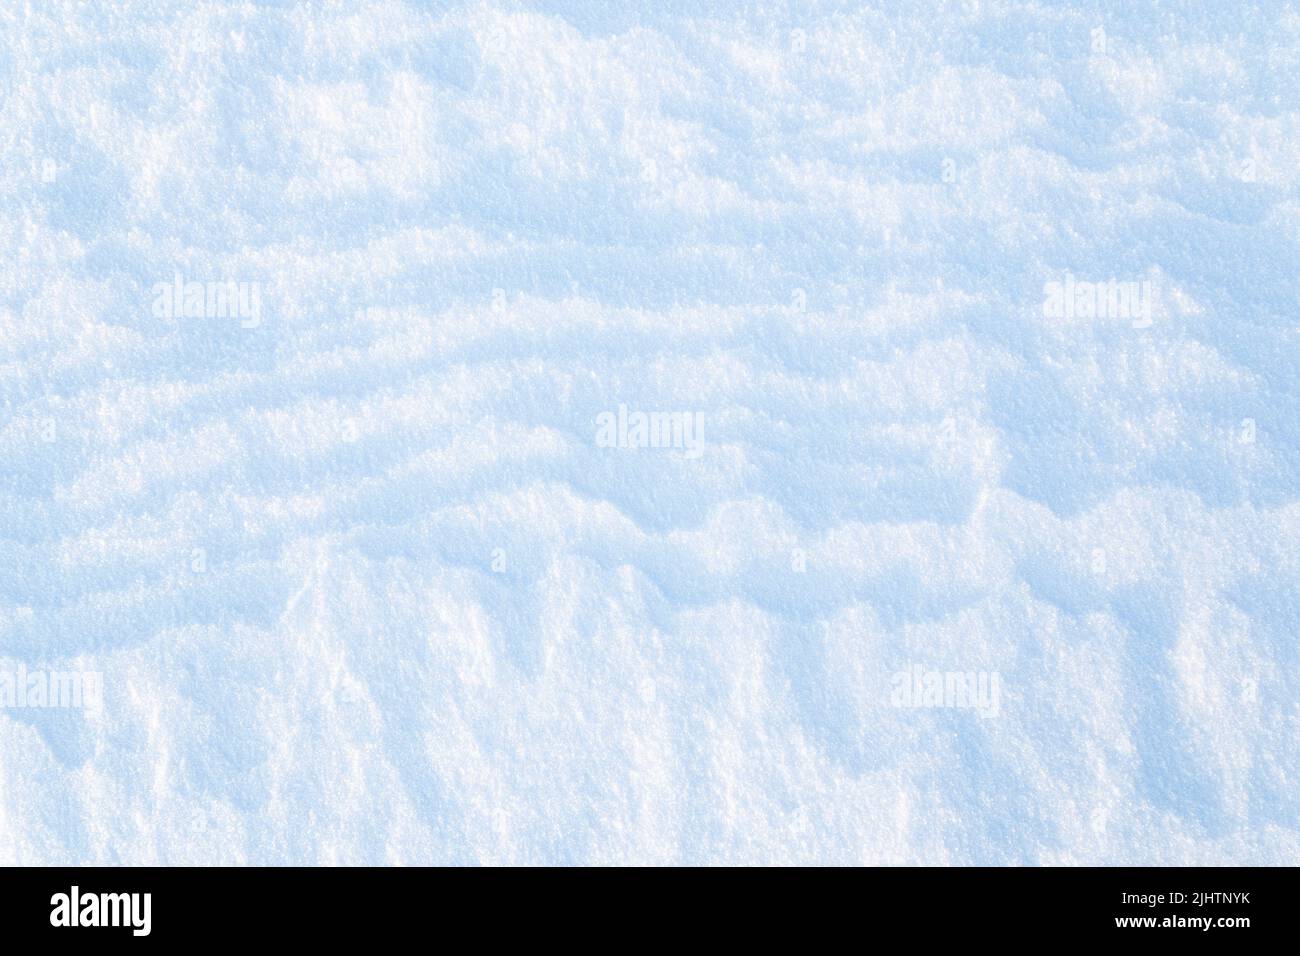 Close-up of fresh snowy land in the winter on a sunny day, viewed from above. Abstract full frame textured background. Copy space. Top view. Stock Photo